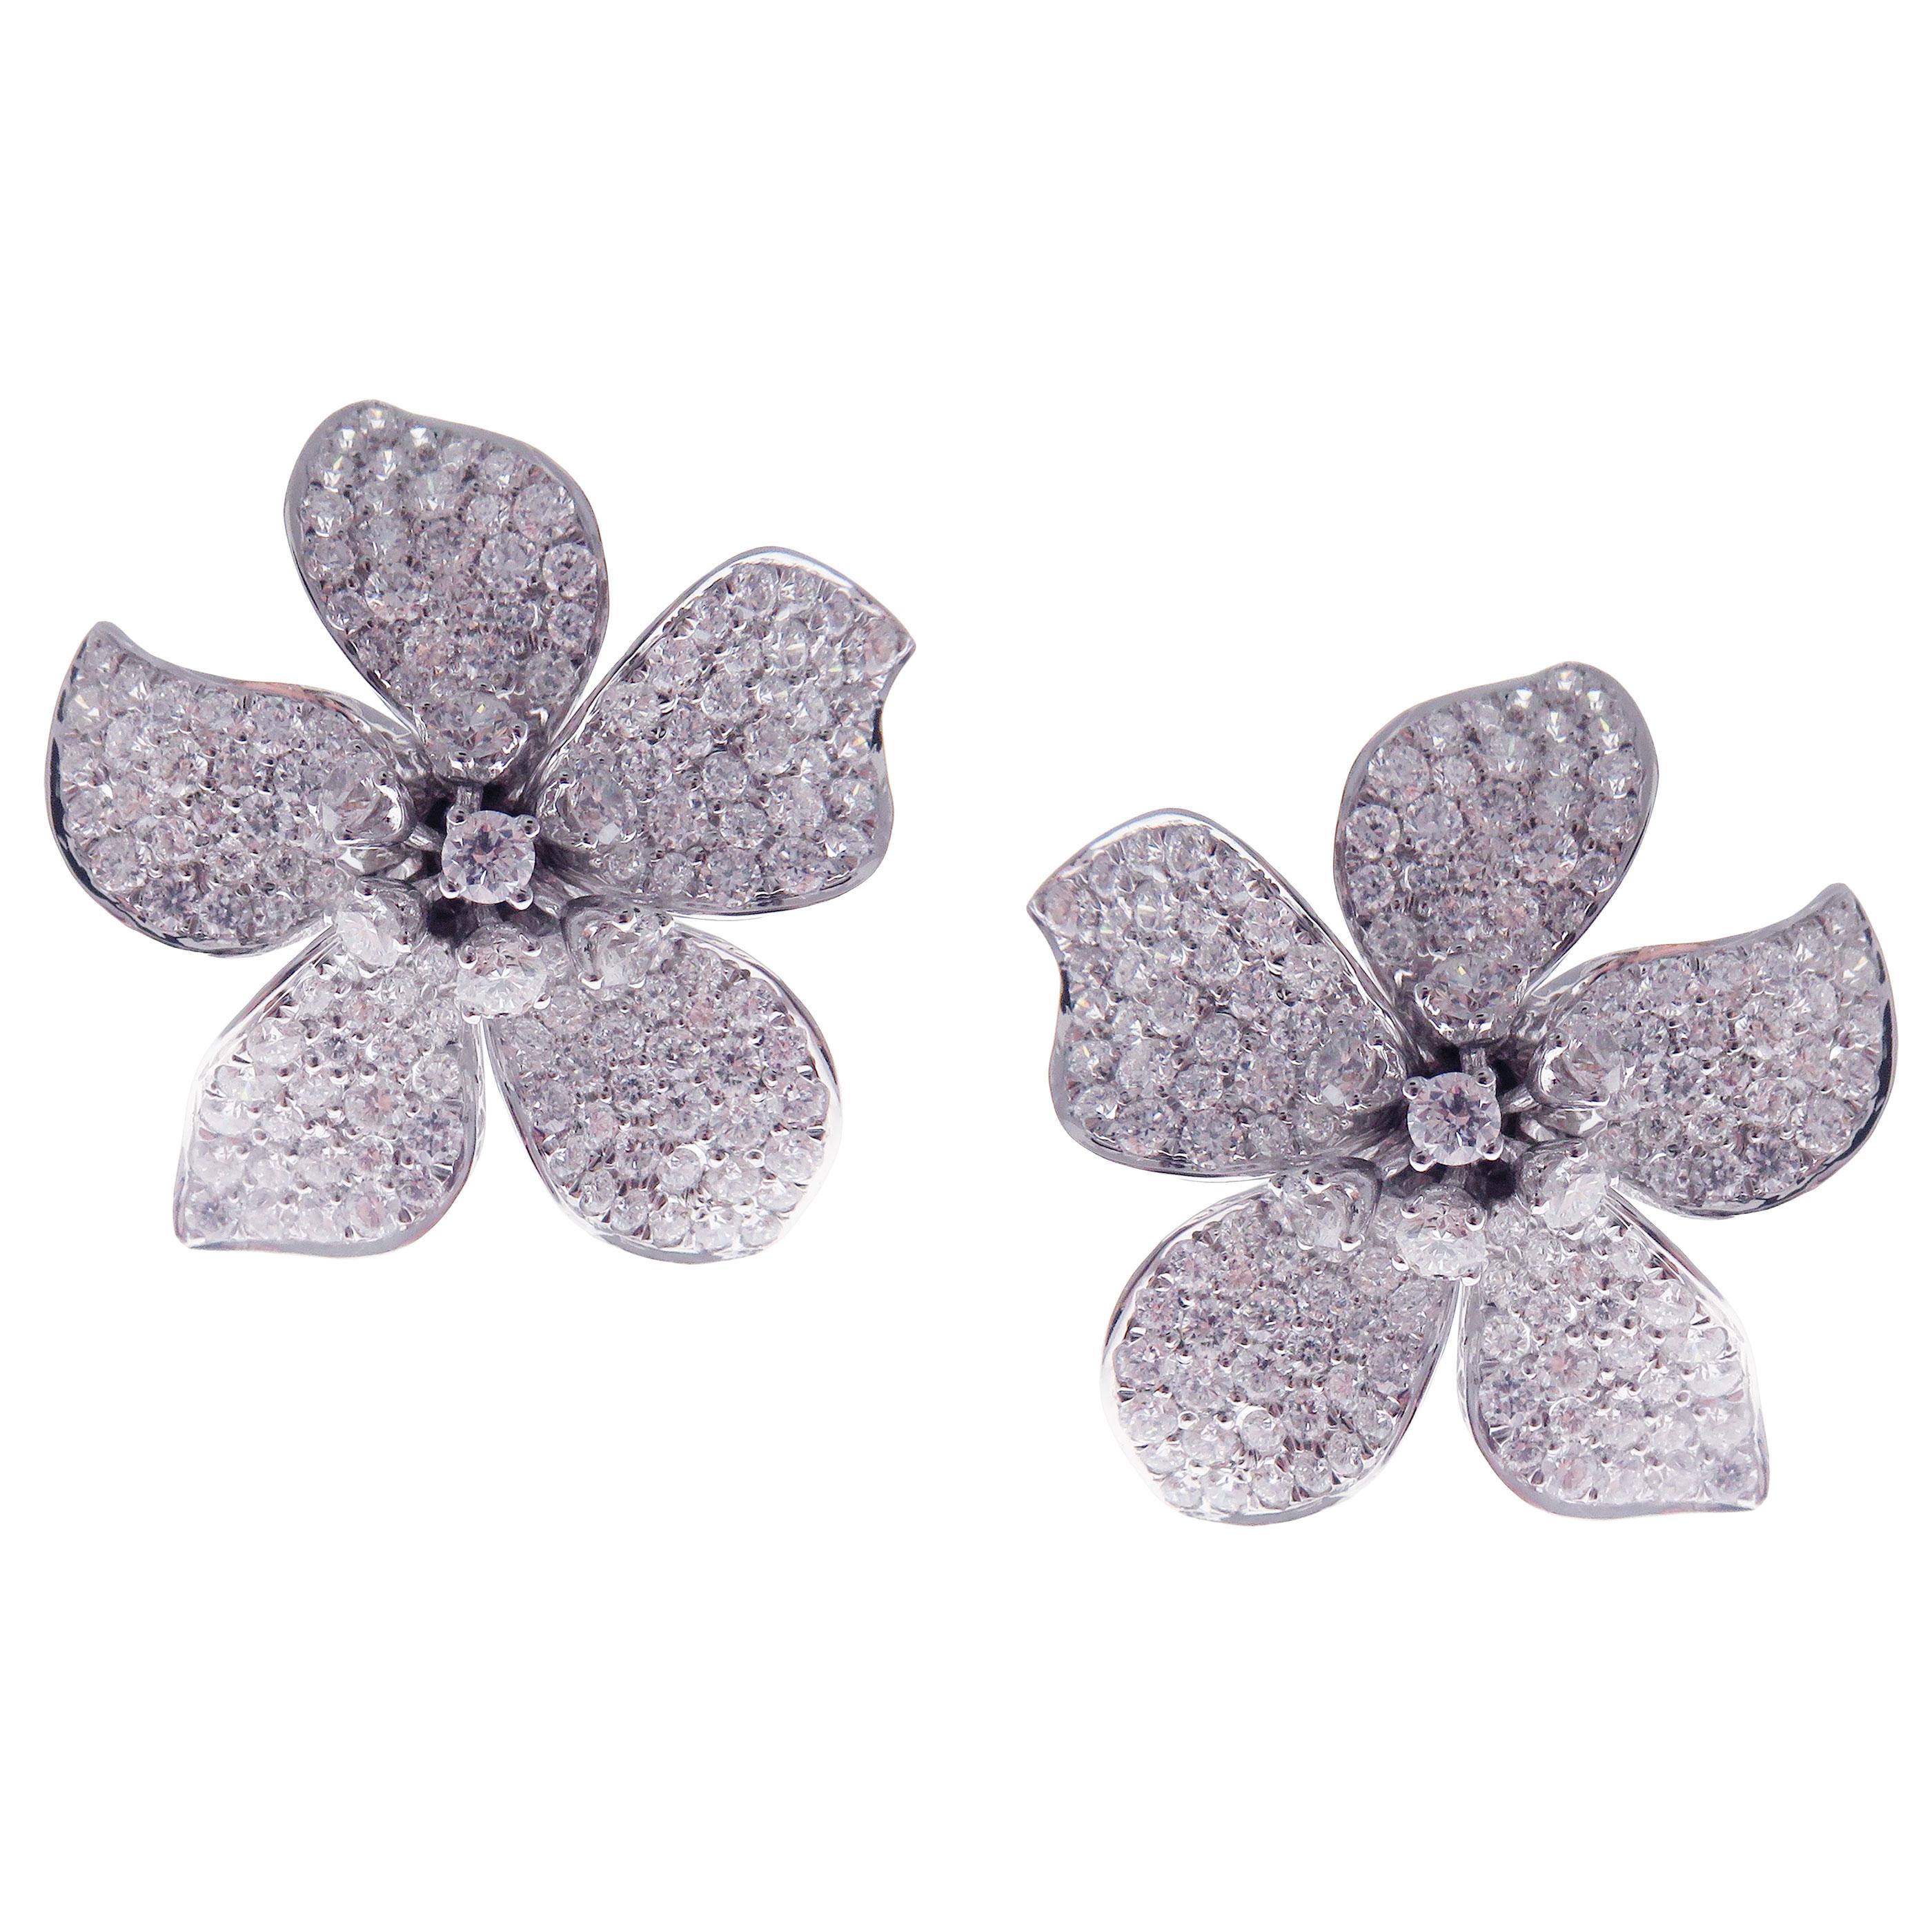 This large diamond classic pave five petals flower earring is crafted in 18-karat white gold, featuring 303 round white diamonds totaling of 6.53 carats. 
Approximate total weight 14.41 grams.
These earrings come with push back post backings.
SI-G